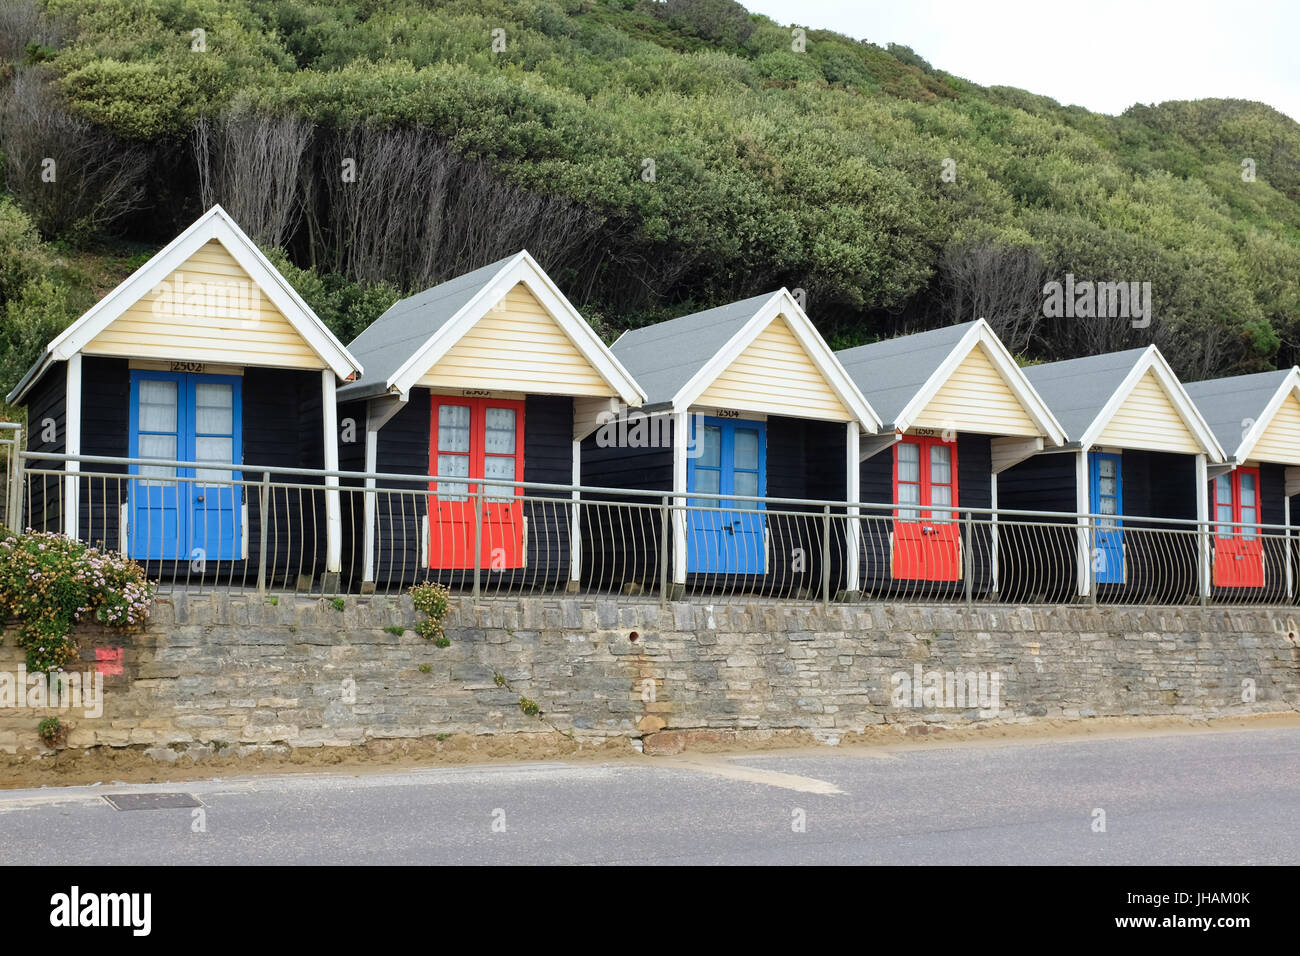 Beach chalets in Bournemouth, Dorset, England. Stock Photo